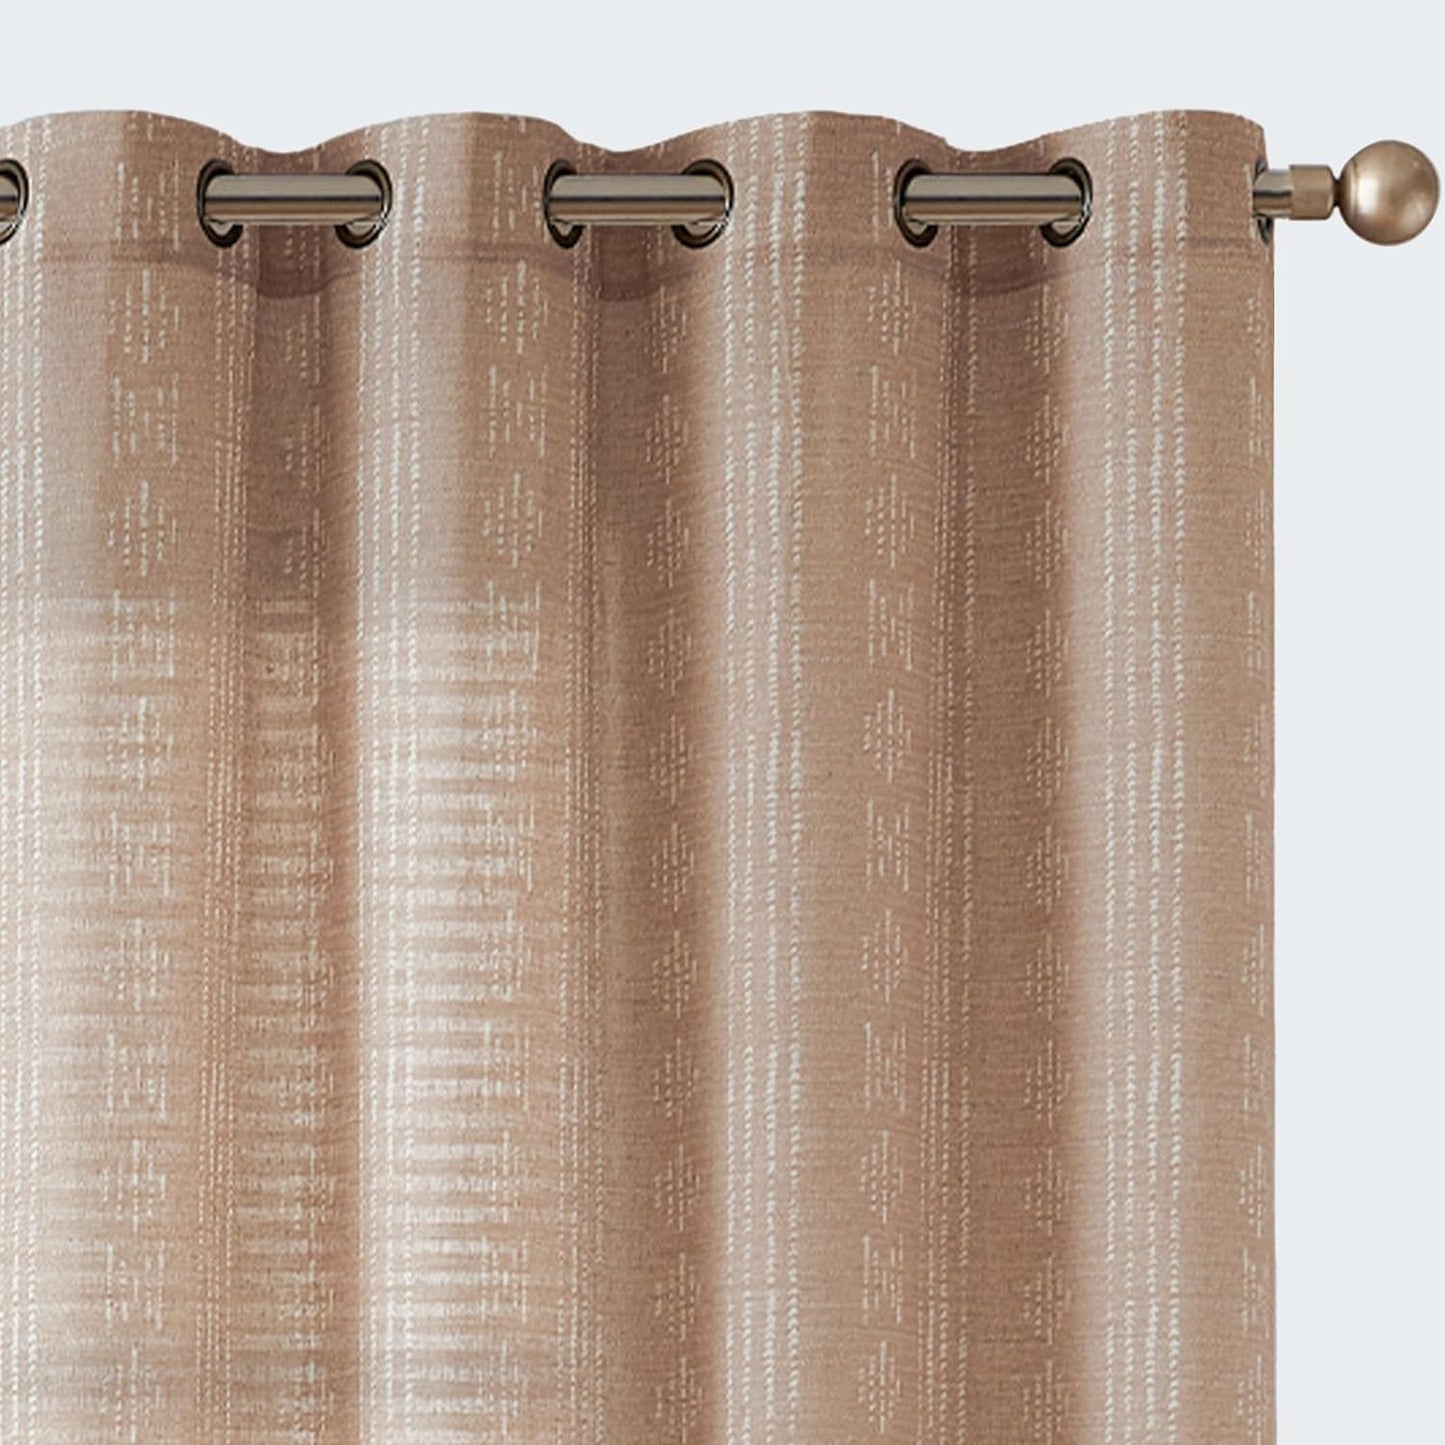 Jinchan Boho Curtains Linen Sliding Patio Door Curtains 84 Inches Long 1 Panel Divider Drapes Extra Wide Black Farmhouse Curtains for Living Room Geometric Striped Light Filtering Grommet Curtains  CKNY HOME FASHION Boho| Brown W52 X L63 